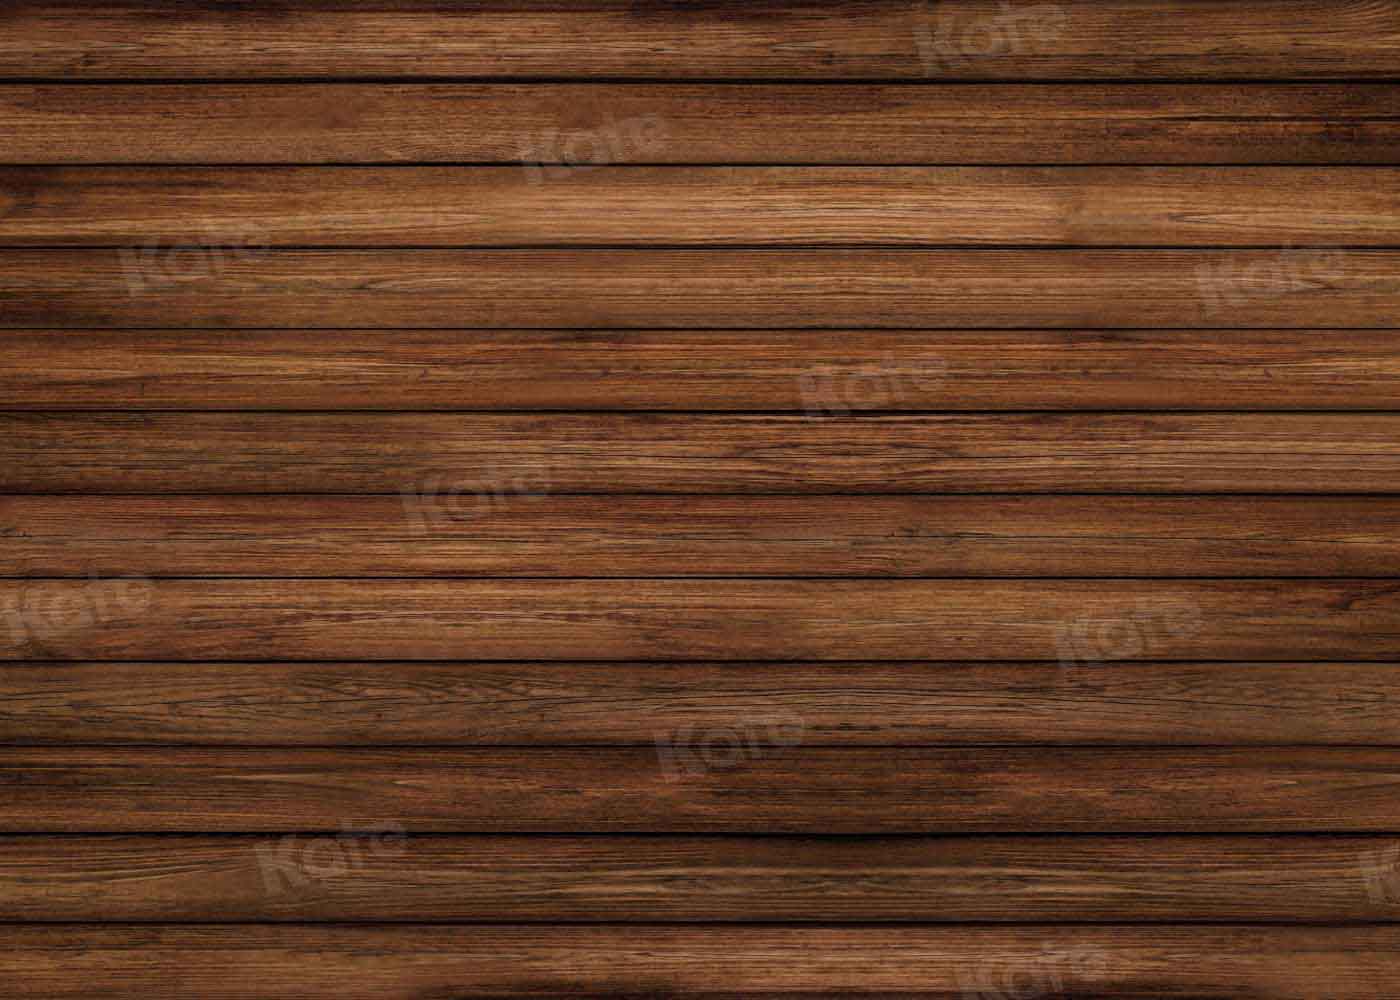 Kate White Old Wooden Floor Backdrop Designed by Patty Robert